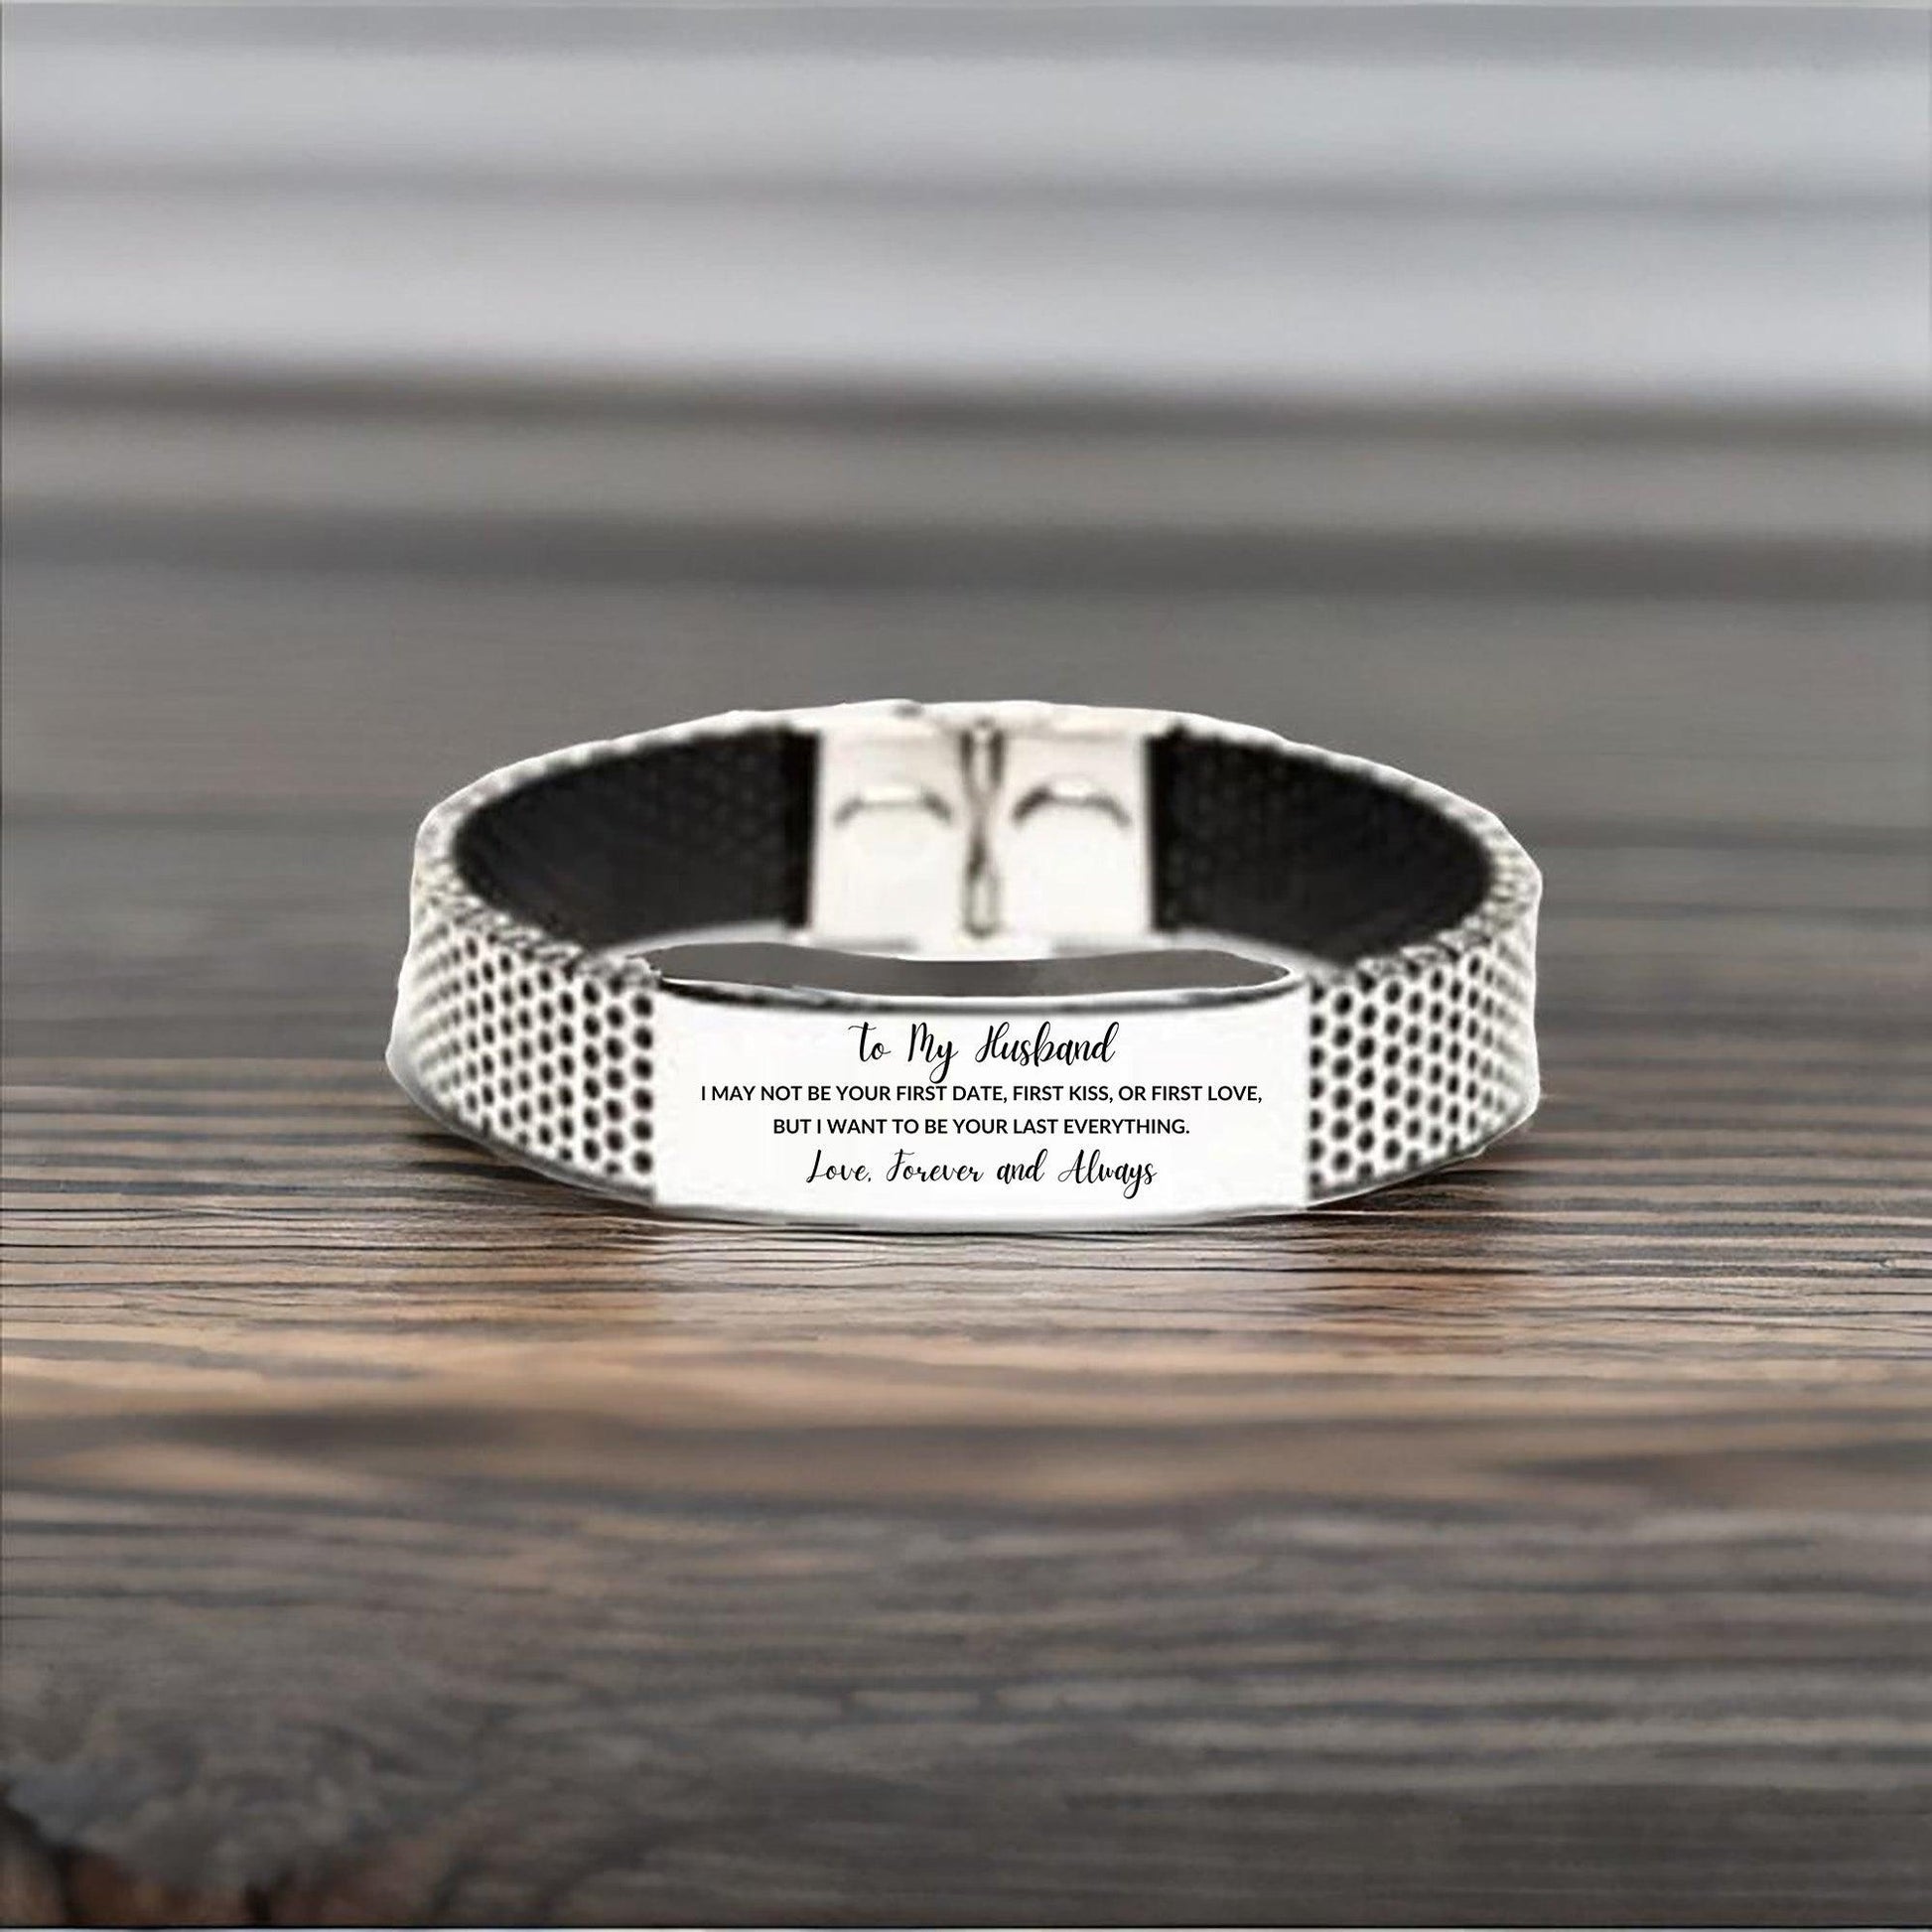 To My Husband I Want to Be Your Last Everything Engraved Stainless Steel Mesh Bracelet, Romantic Birthday, Valentine, Gifts - Mallard Moon Gift Shop